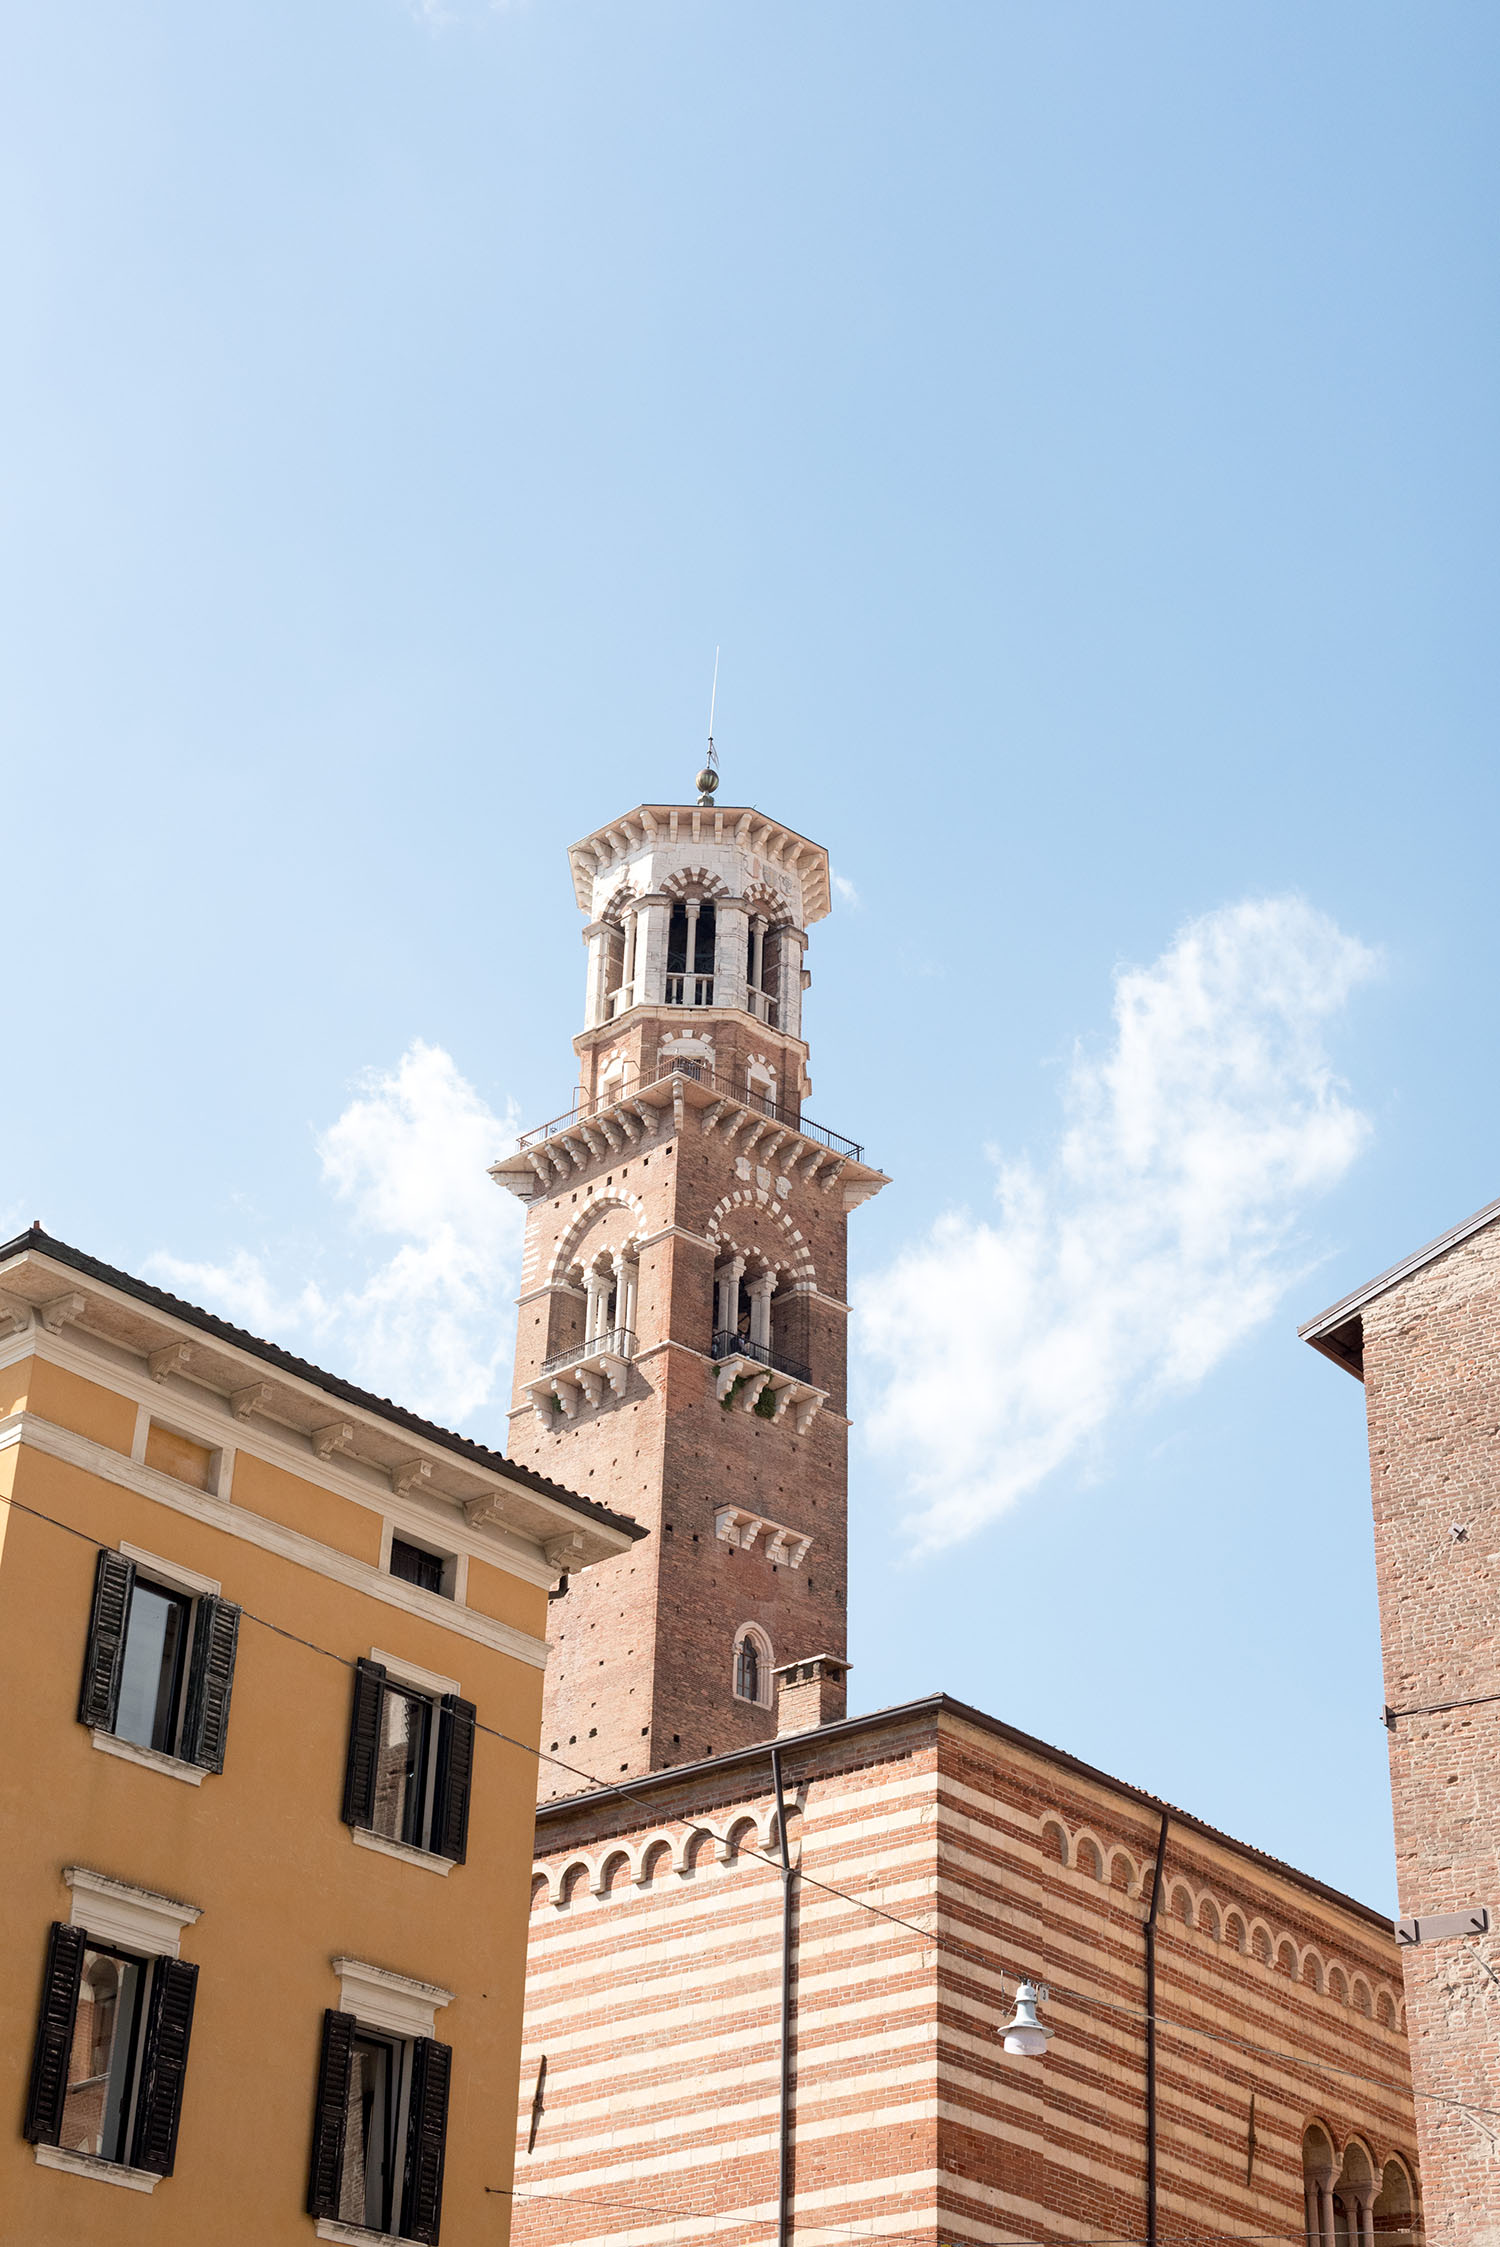 The medieval bell tower in Verona, Italy, as captured by top Canadian travel blogger Cee Fardoe of Coco & Vera